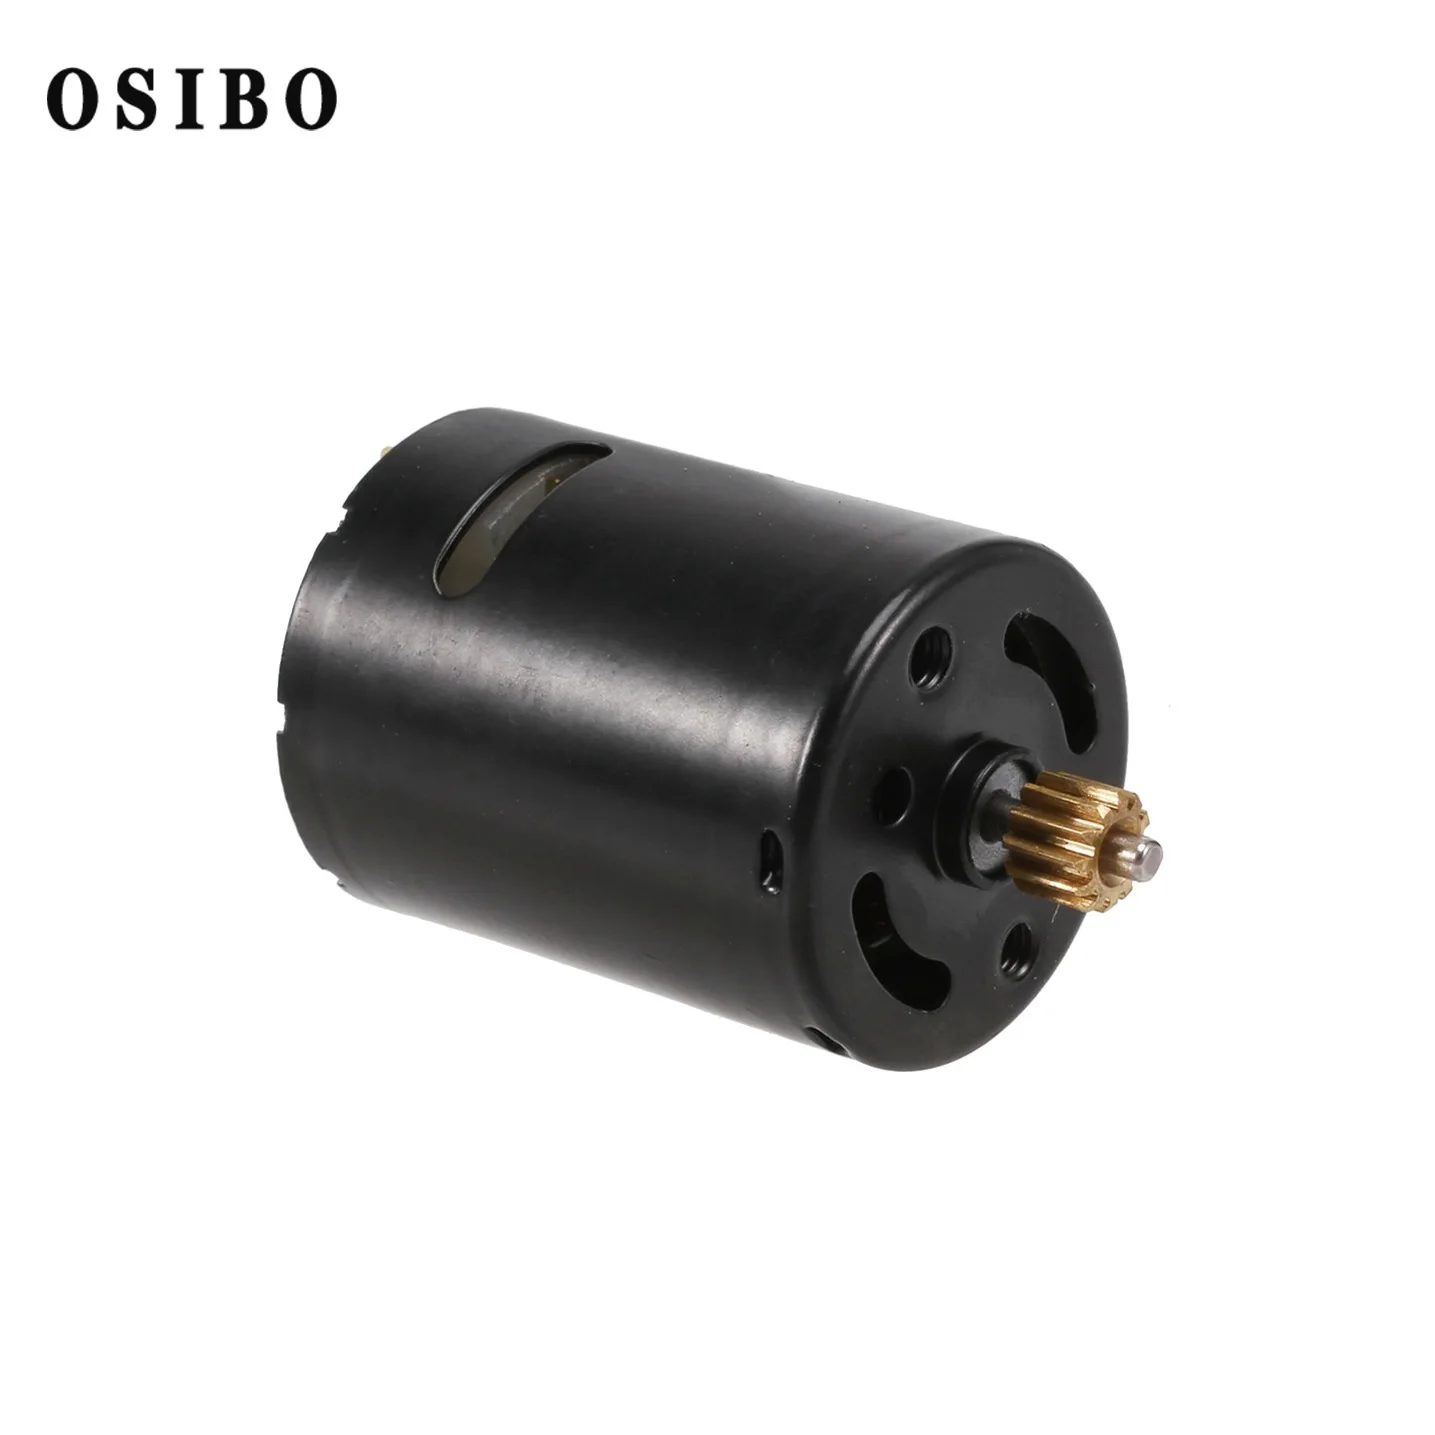 

370 High Speed Motor 52000 RPM For WPL D12 C14 C24 B14 B24 B16 B36 MN D90 MN99S RC Car Upgrade Parts Accessories